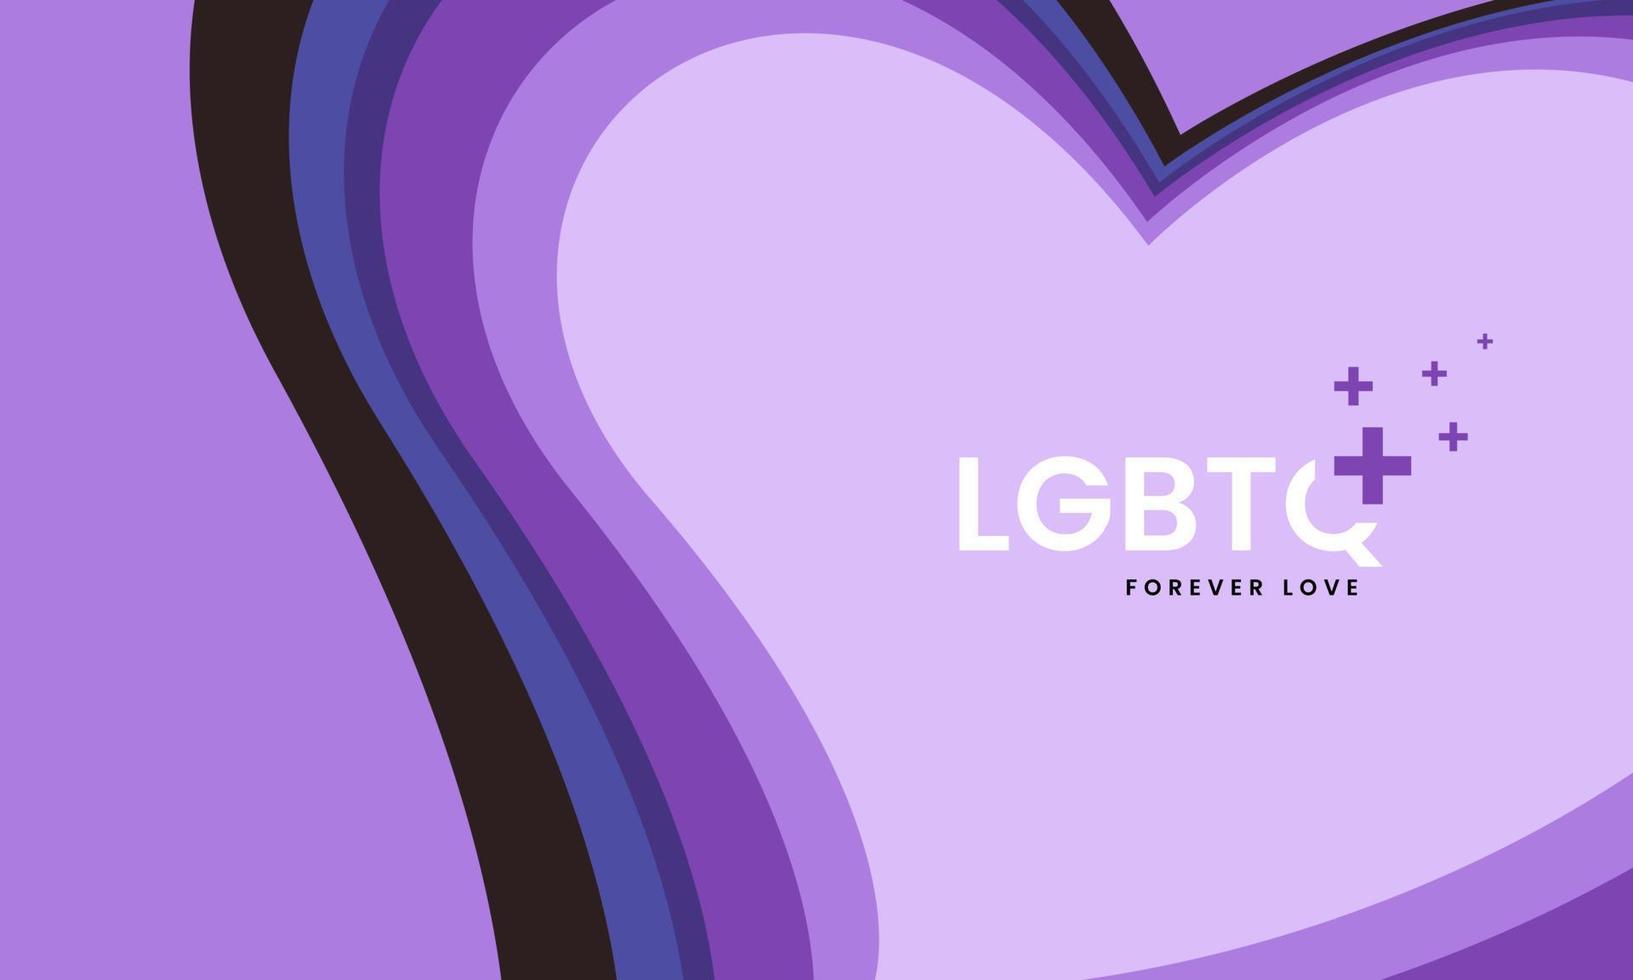 LGBTQ plus Colorful rainbow heart shape background design for LGBTQ pride month on light purple background with text space, Vector and illustration template